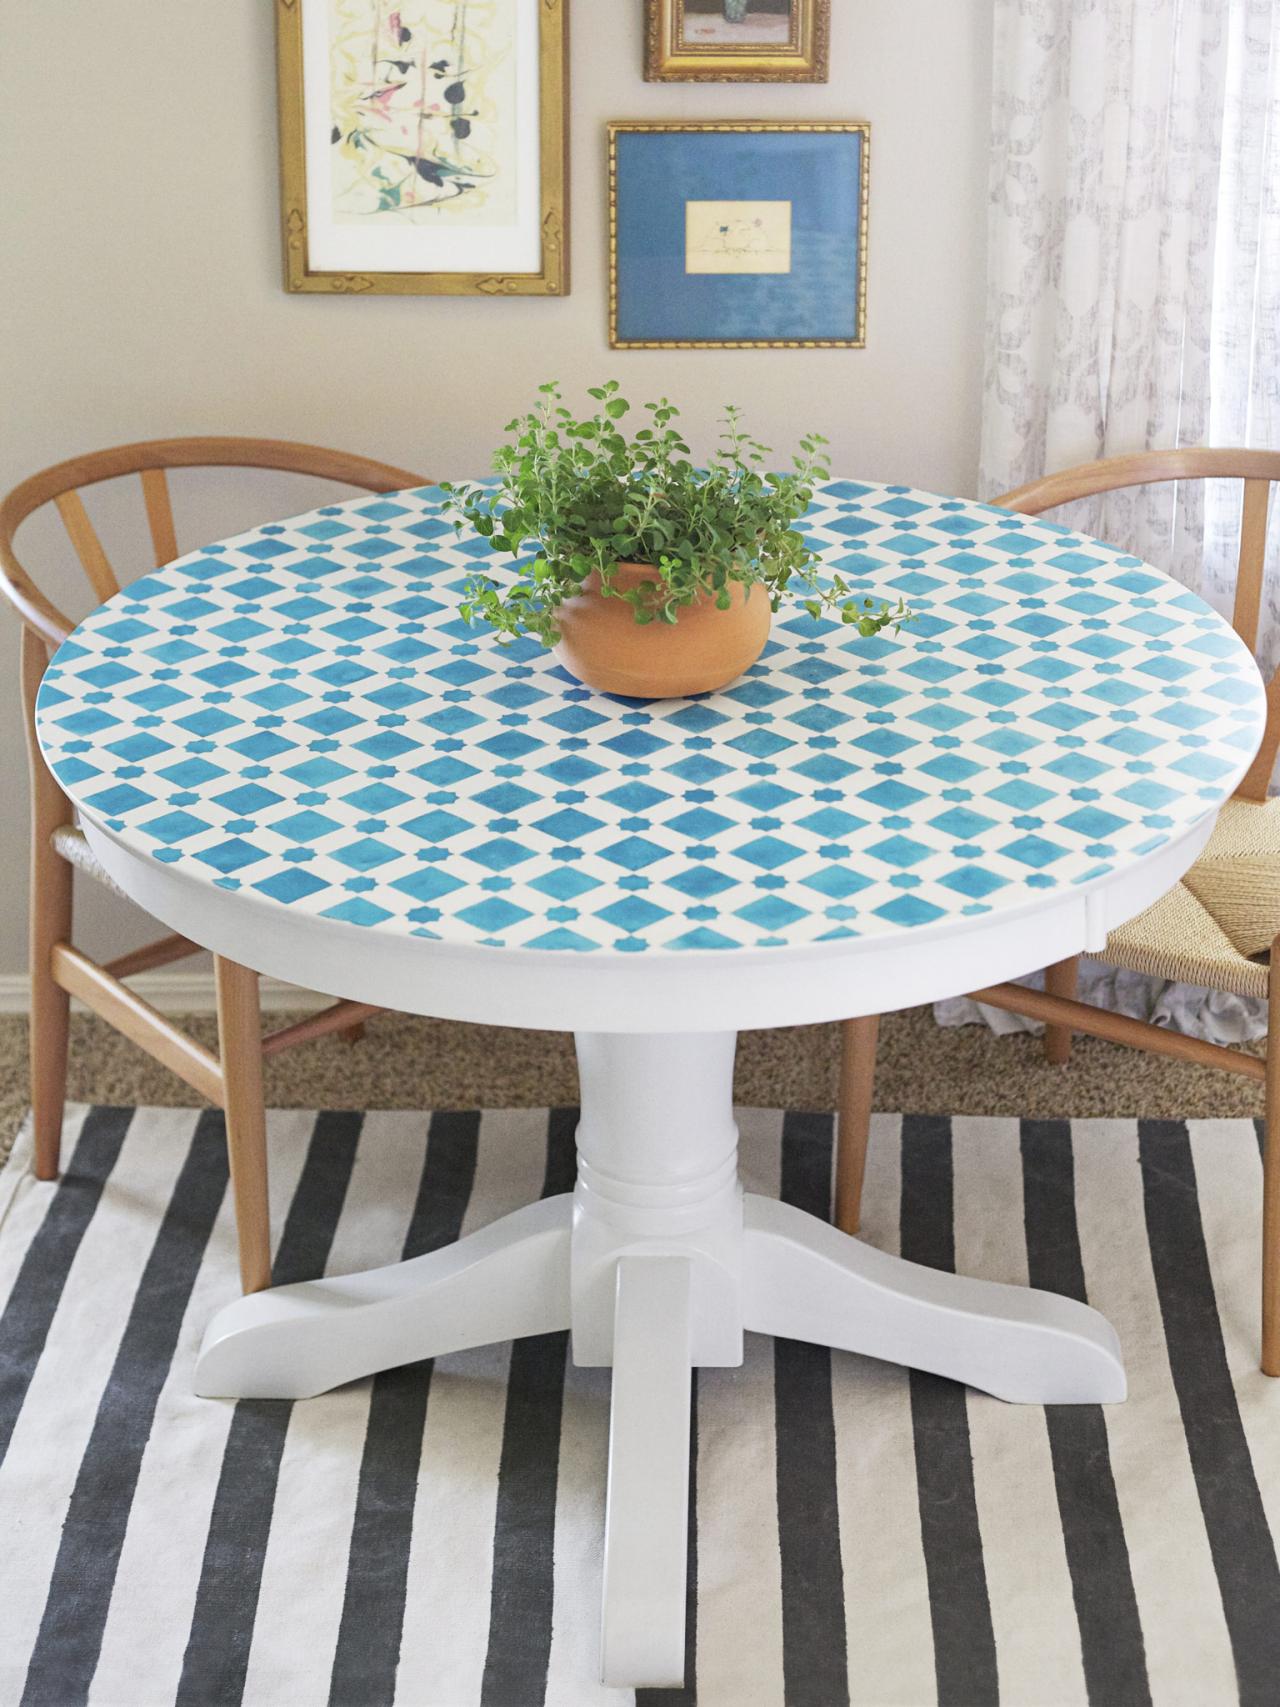 How To Paint A Mosaic Table Top Hgtv